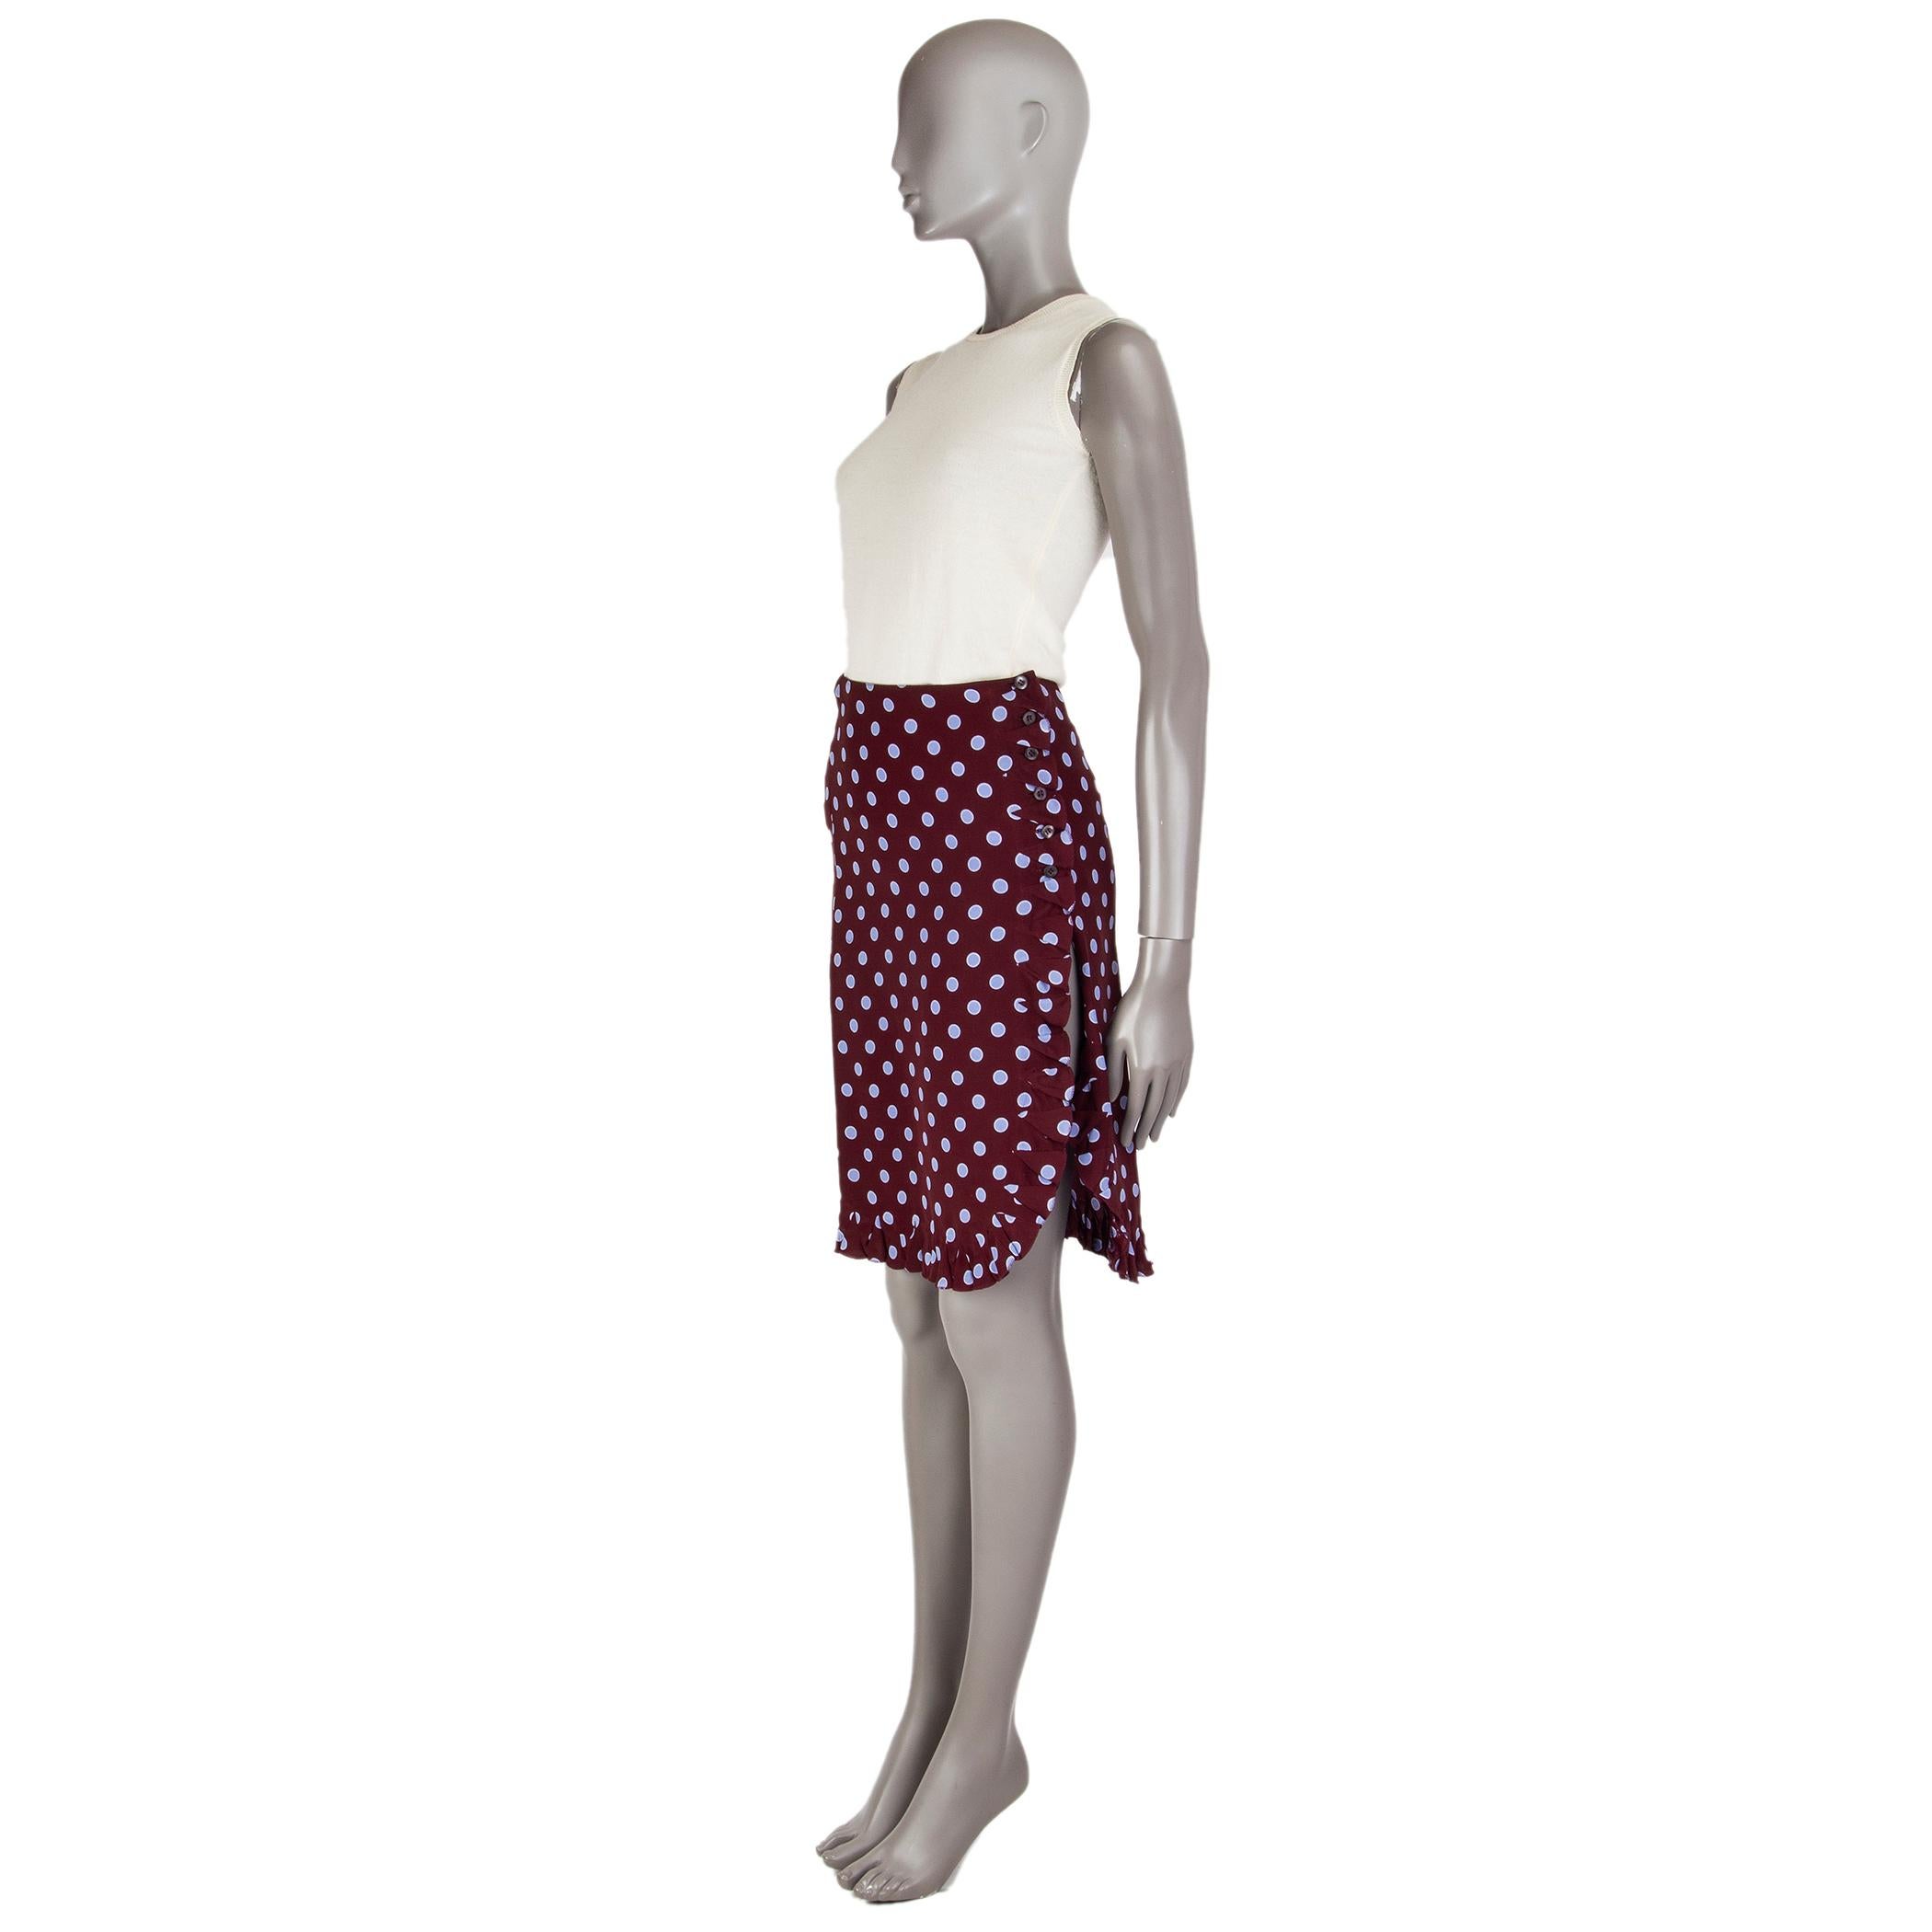 Prada polka dot skirt in brown and violet silk (100%) with a slit in the front and a ruffled hemline. Closes with buttons along the hemline in the front. Unlined. Has been worn and is in excellent condition.

Tag Size 38
Size XS
Waist 34cm